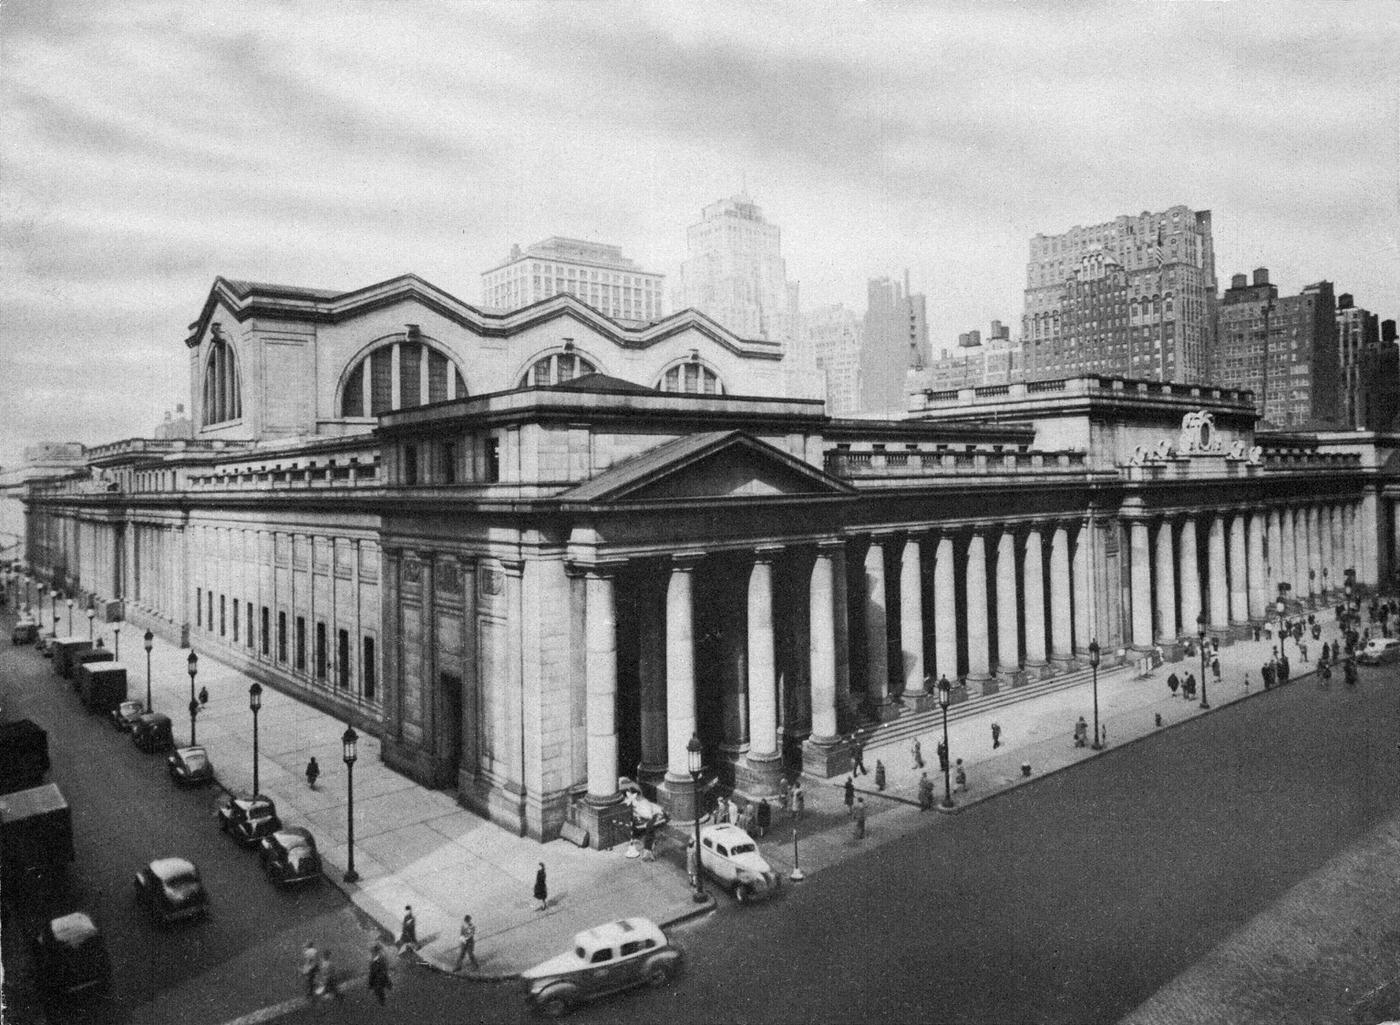 Pennsylvania Station In New York Pictured From The Corner Of Seventh Avenue, Manhattan, 1940.